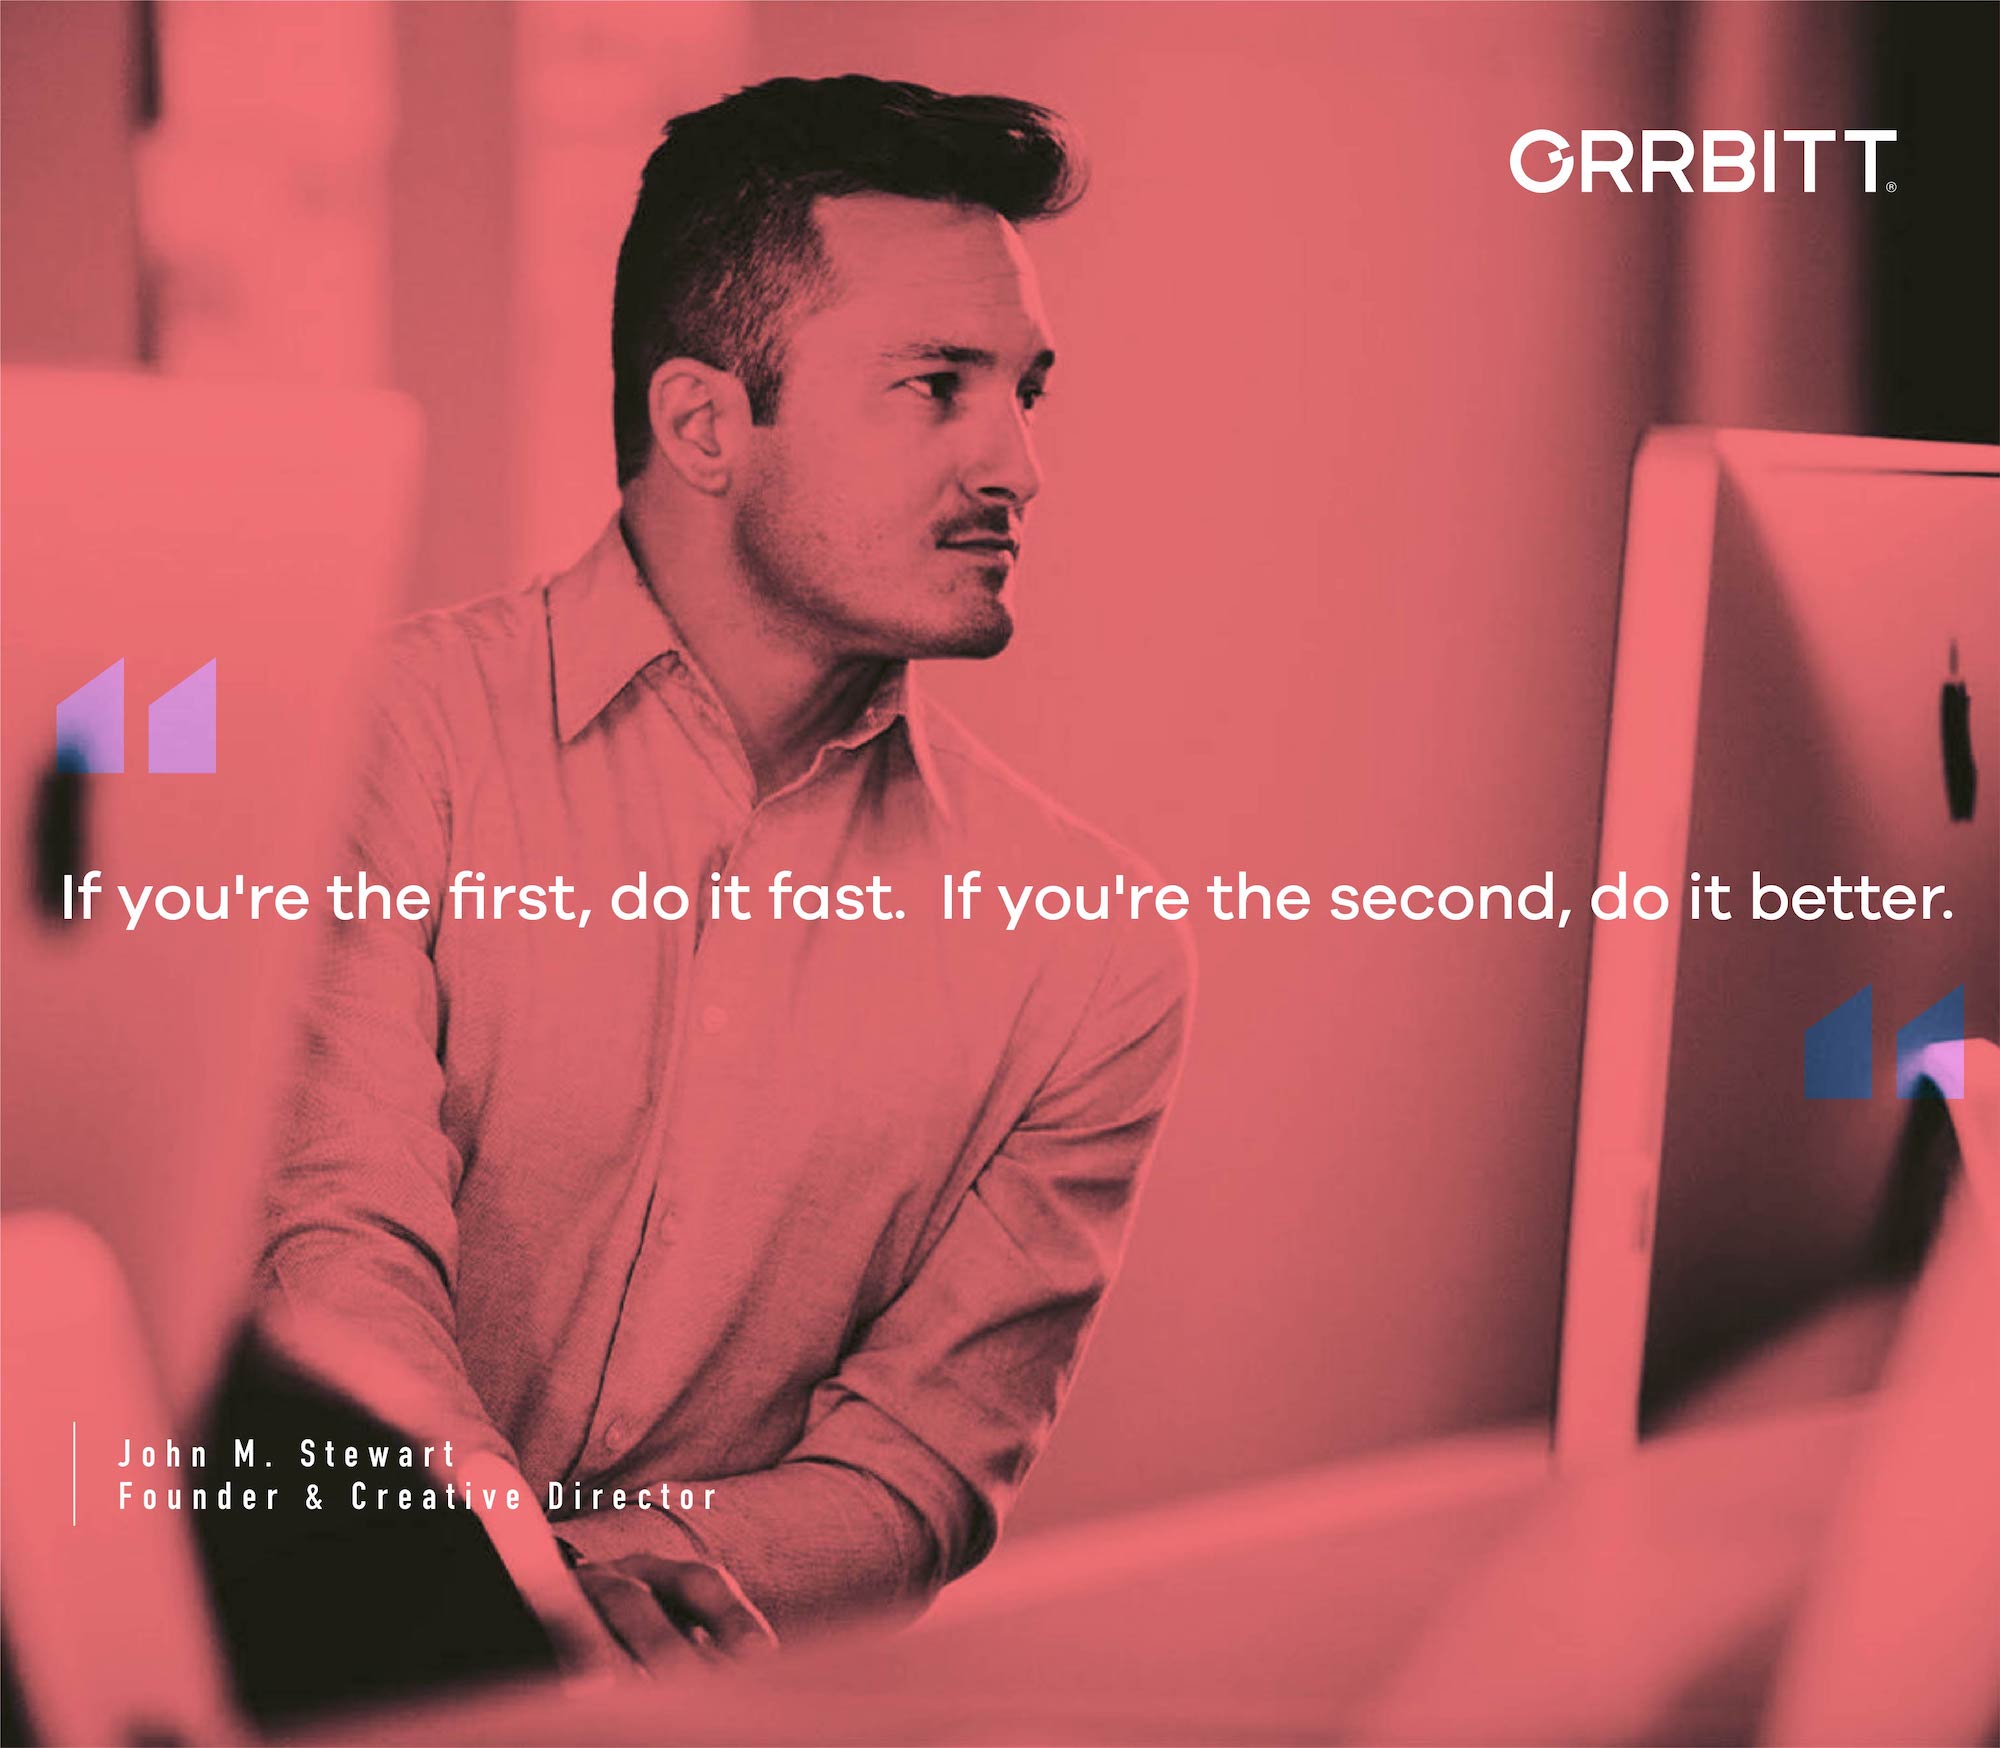 "If you're the first, do it fast. If you're the second, do it better." Quote from John M. Stewart, Founder & Creative Director at Orrbitt. Image is of John sitting in front of a computer and leaning to one side.